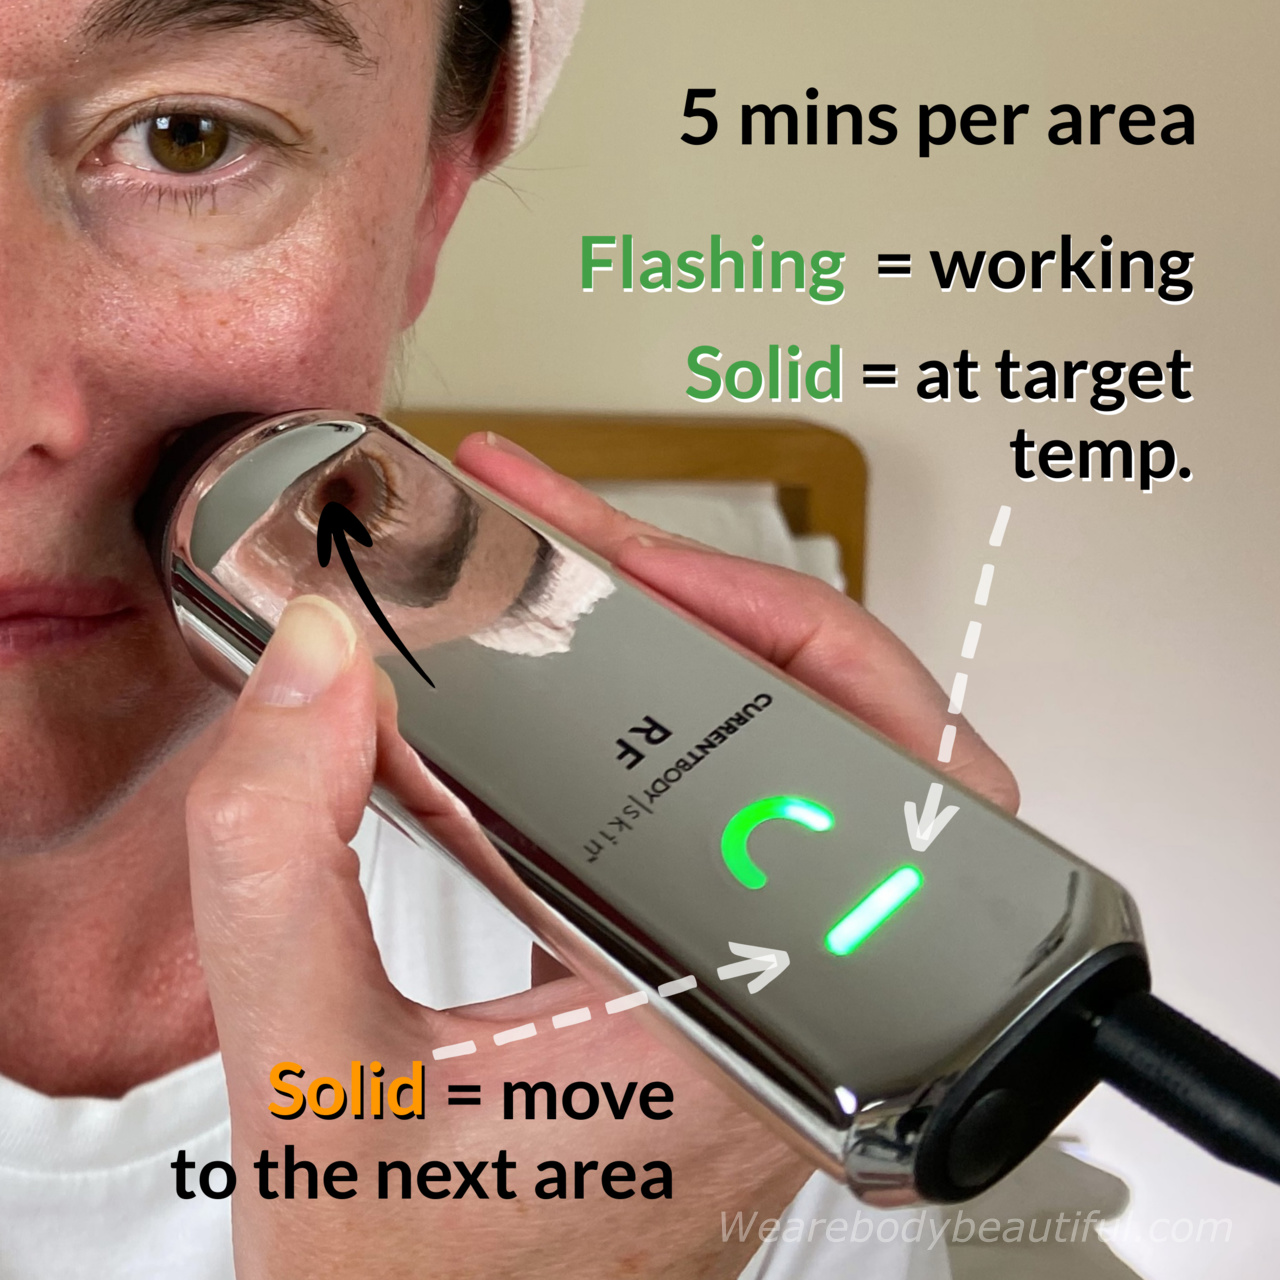 When the flashing green light goes solid, your skin is at the target temperature. When it turns solid orange, 5 mins is up and it's time to move to the next treatment area.